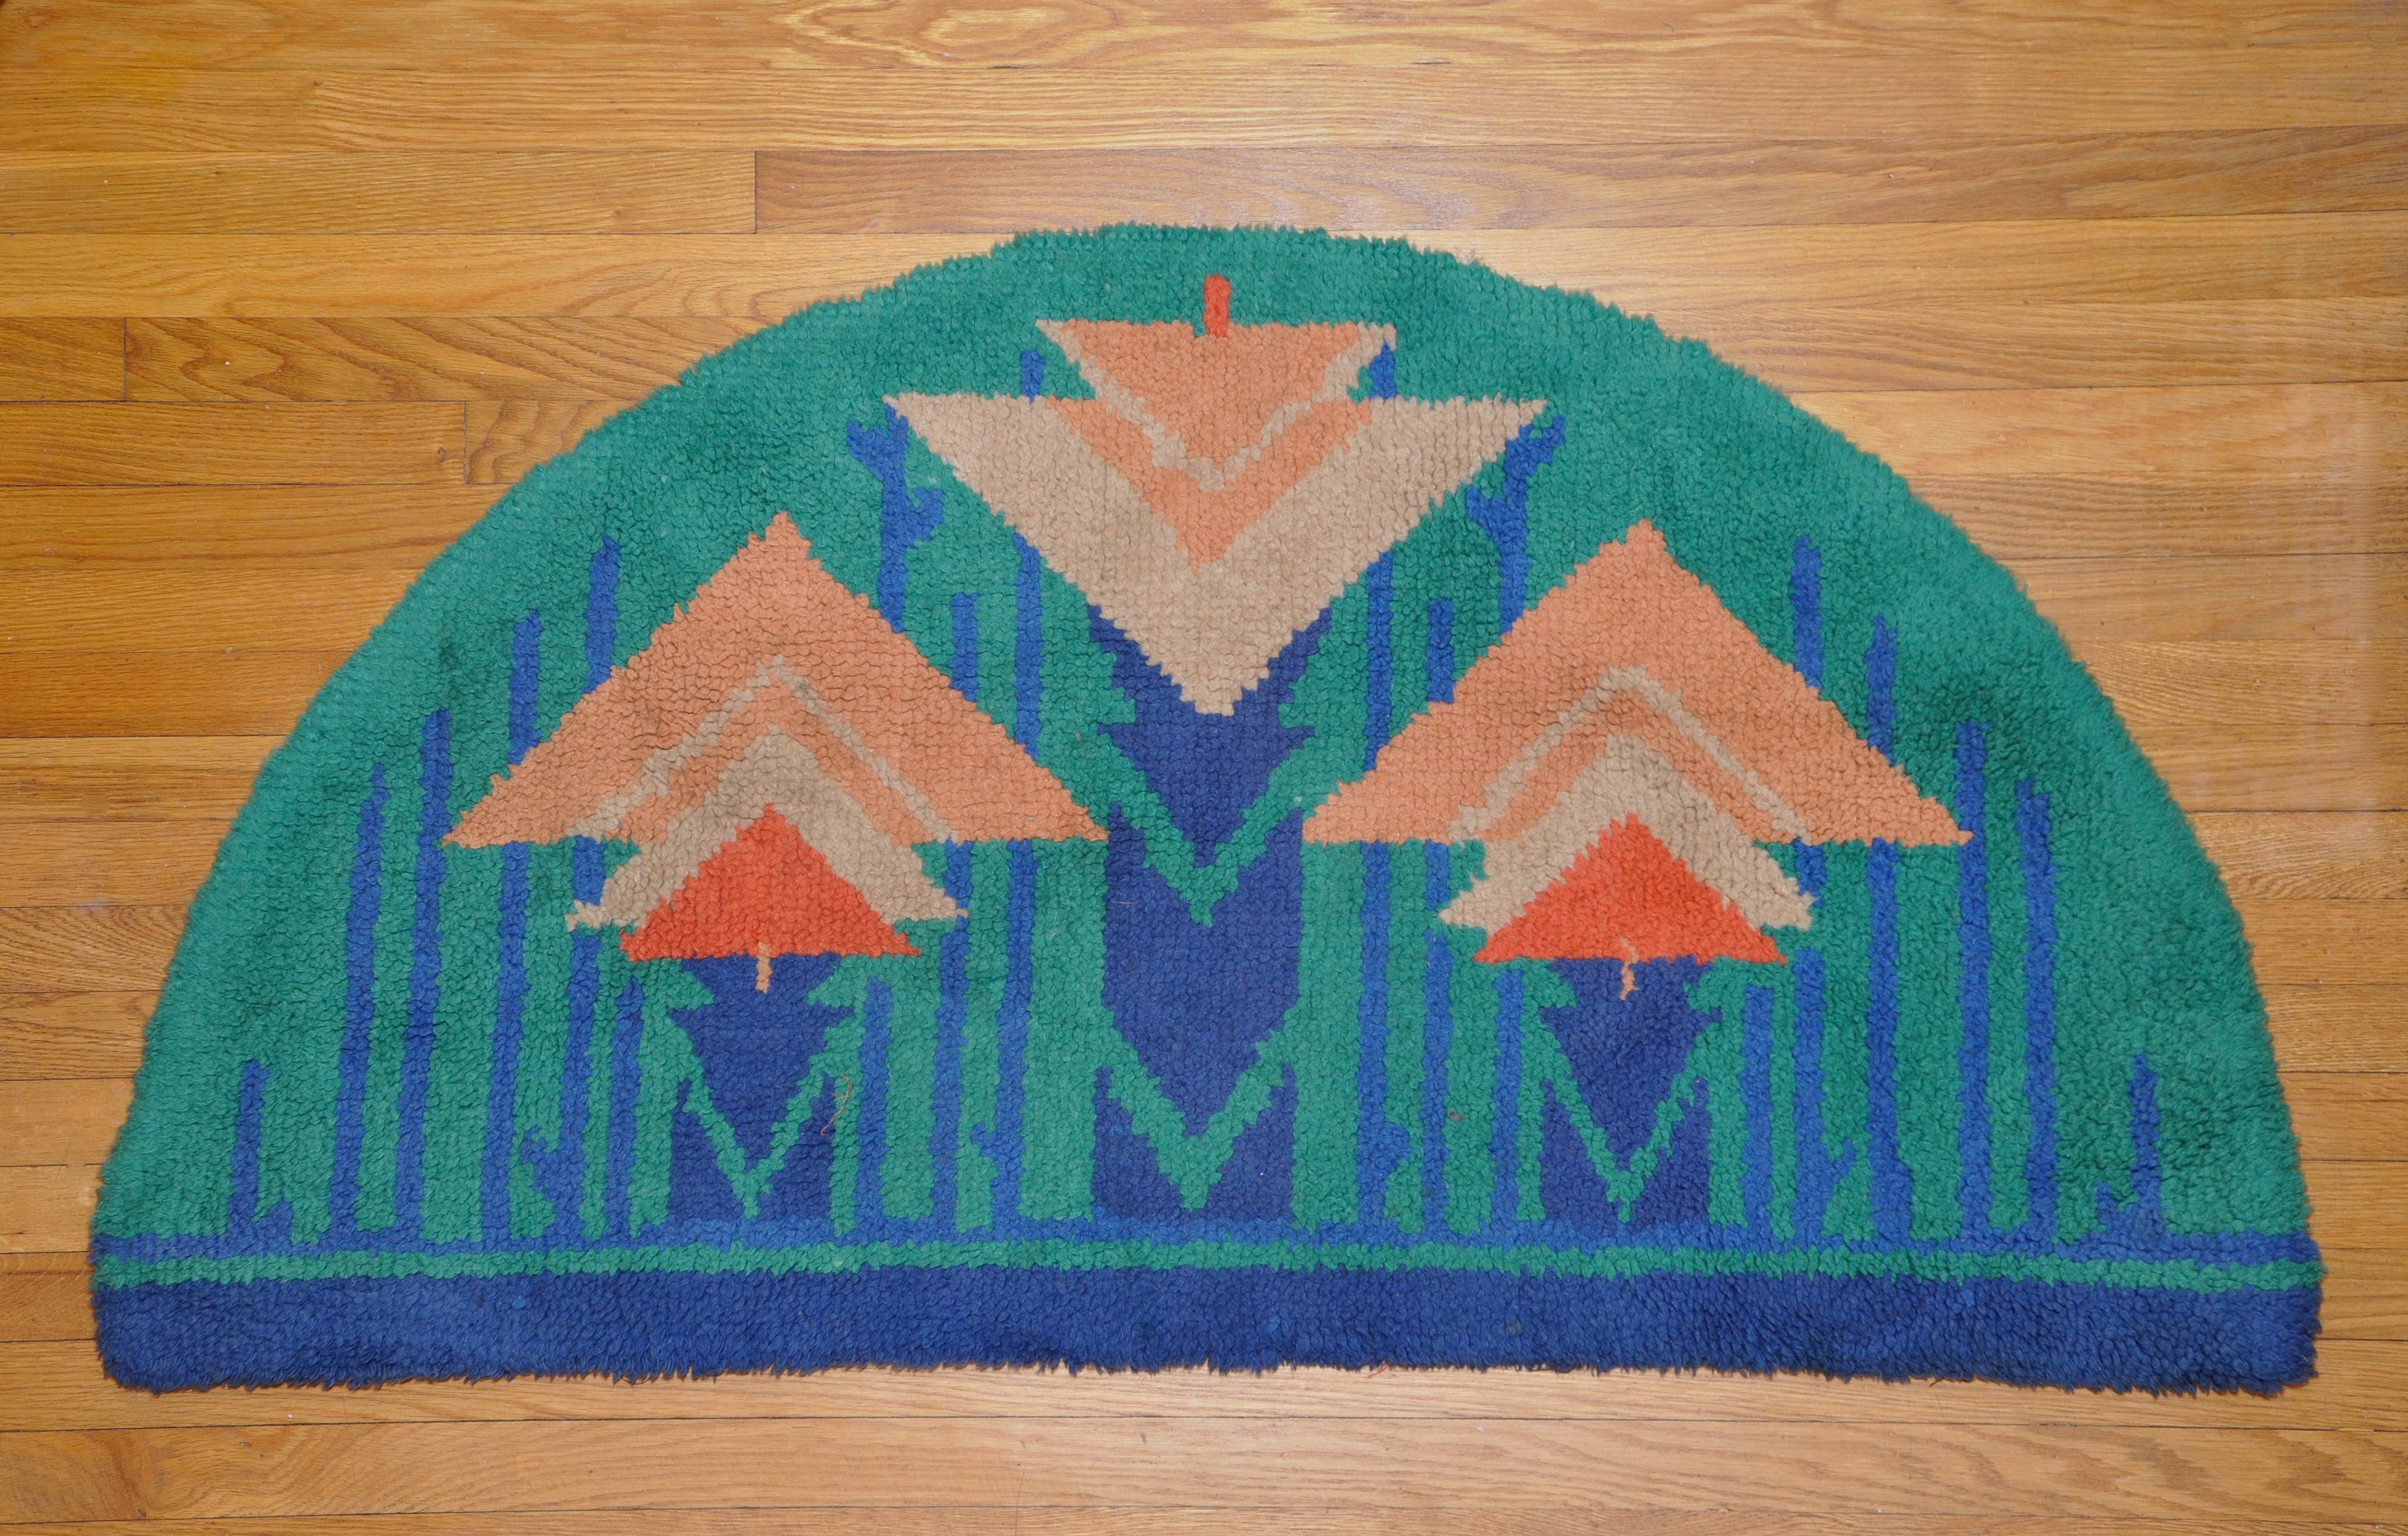 Arts & Crafts (Craftsman) hand-tufted semi-circular hearth rug in a geometric style with a leading motif of superimposed triangles. Thick and luxurious. Strong, bold colors. Probably European, possibly Scandinavian. Could be displayed as a wall